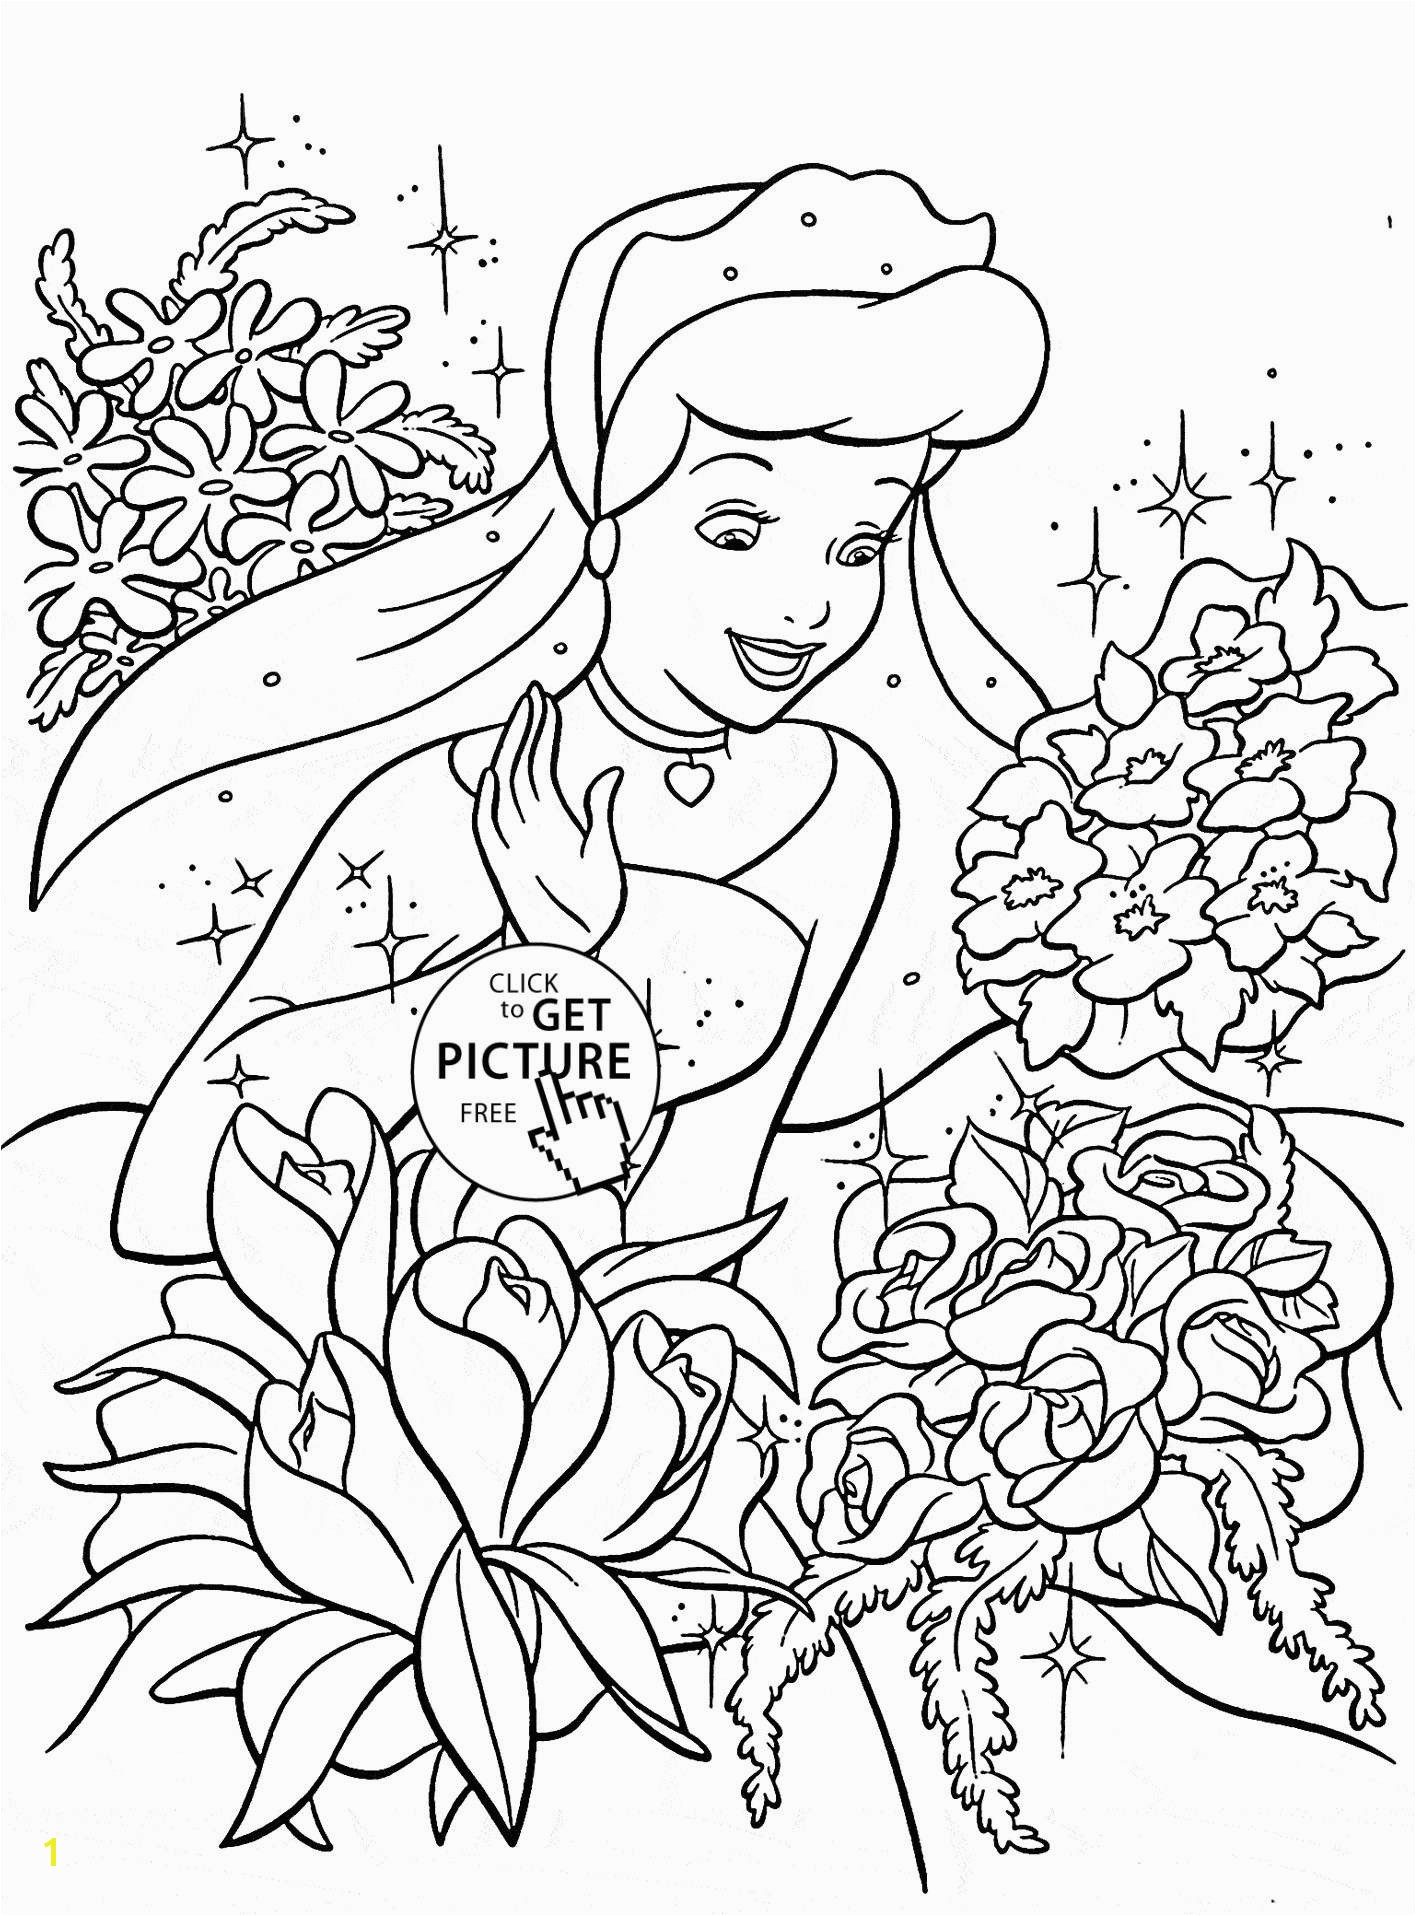 Baby Jasmine Coloring Pages Coloring Pages Happy Birthday Archives Katesgrove